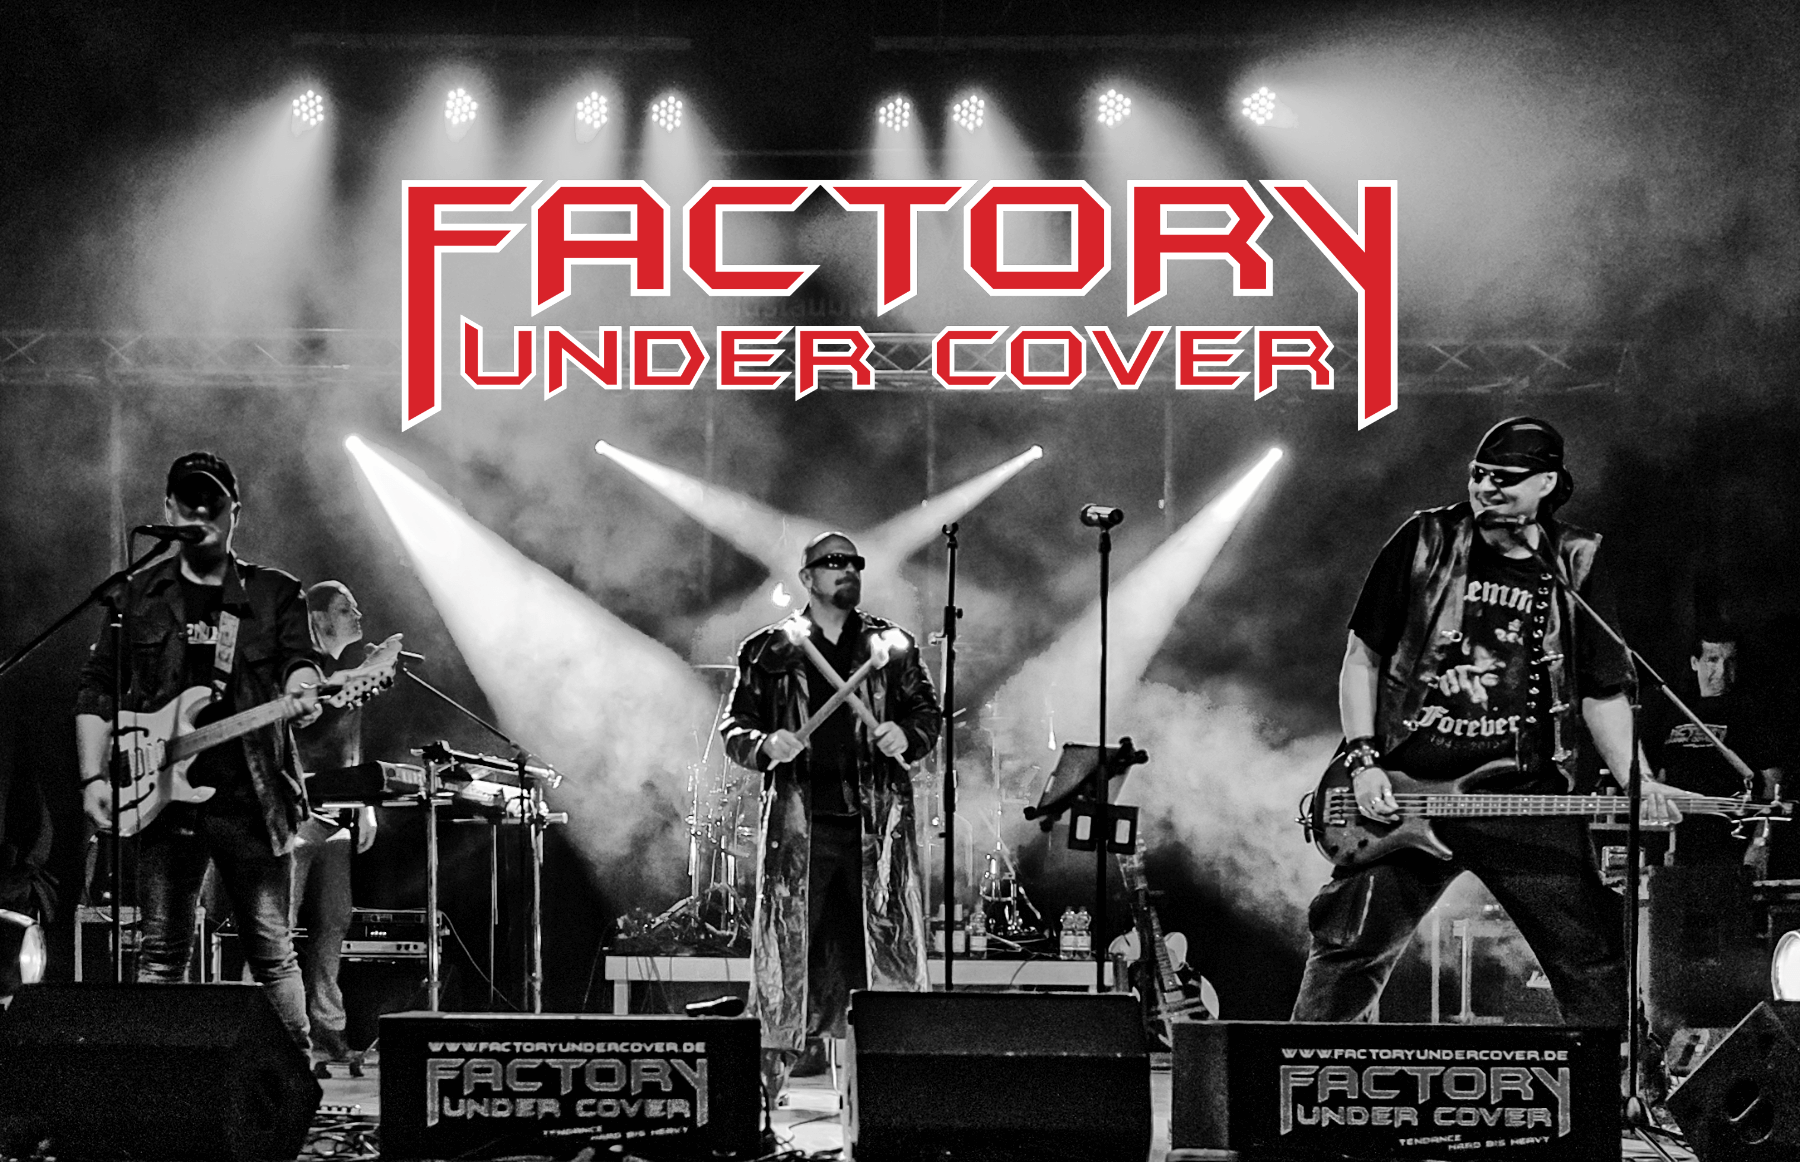 (c) Factory-under-cover.band